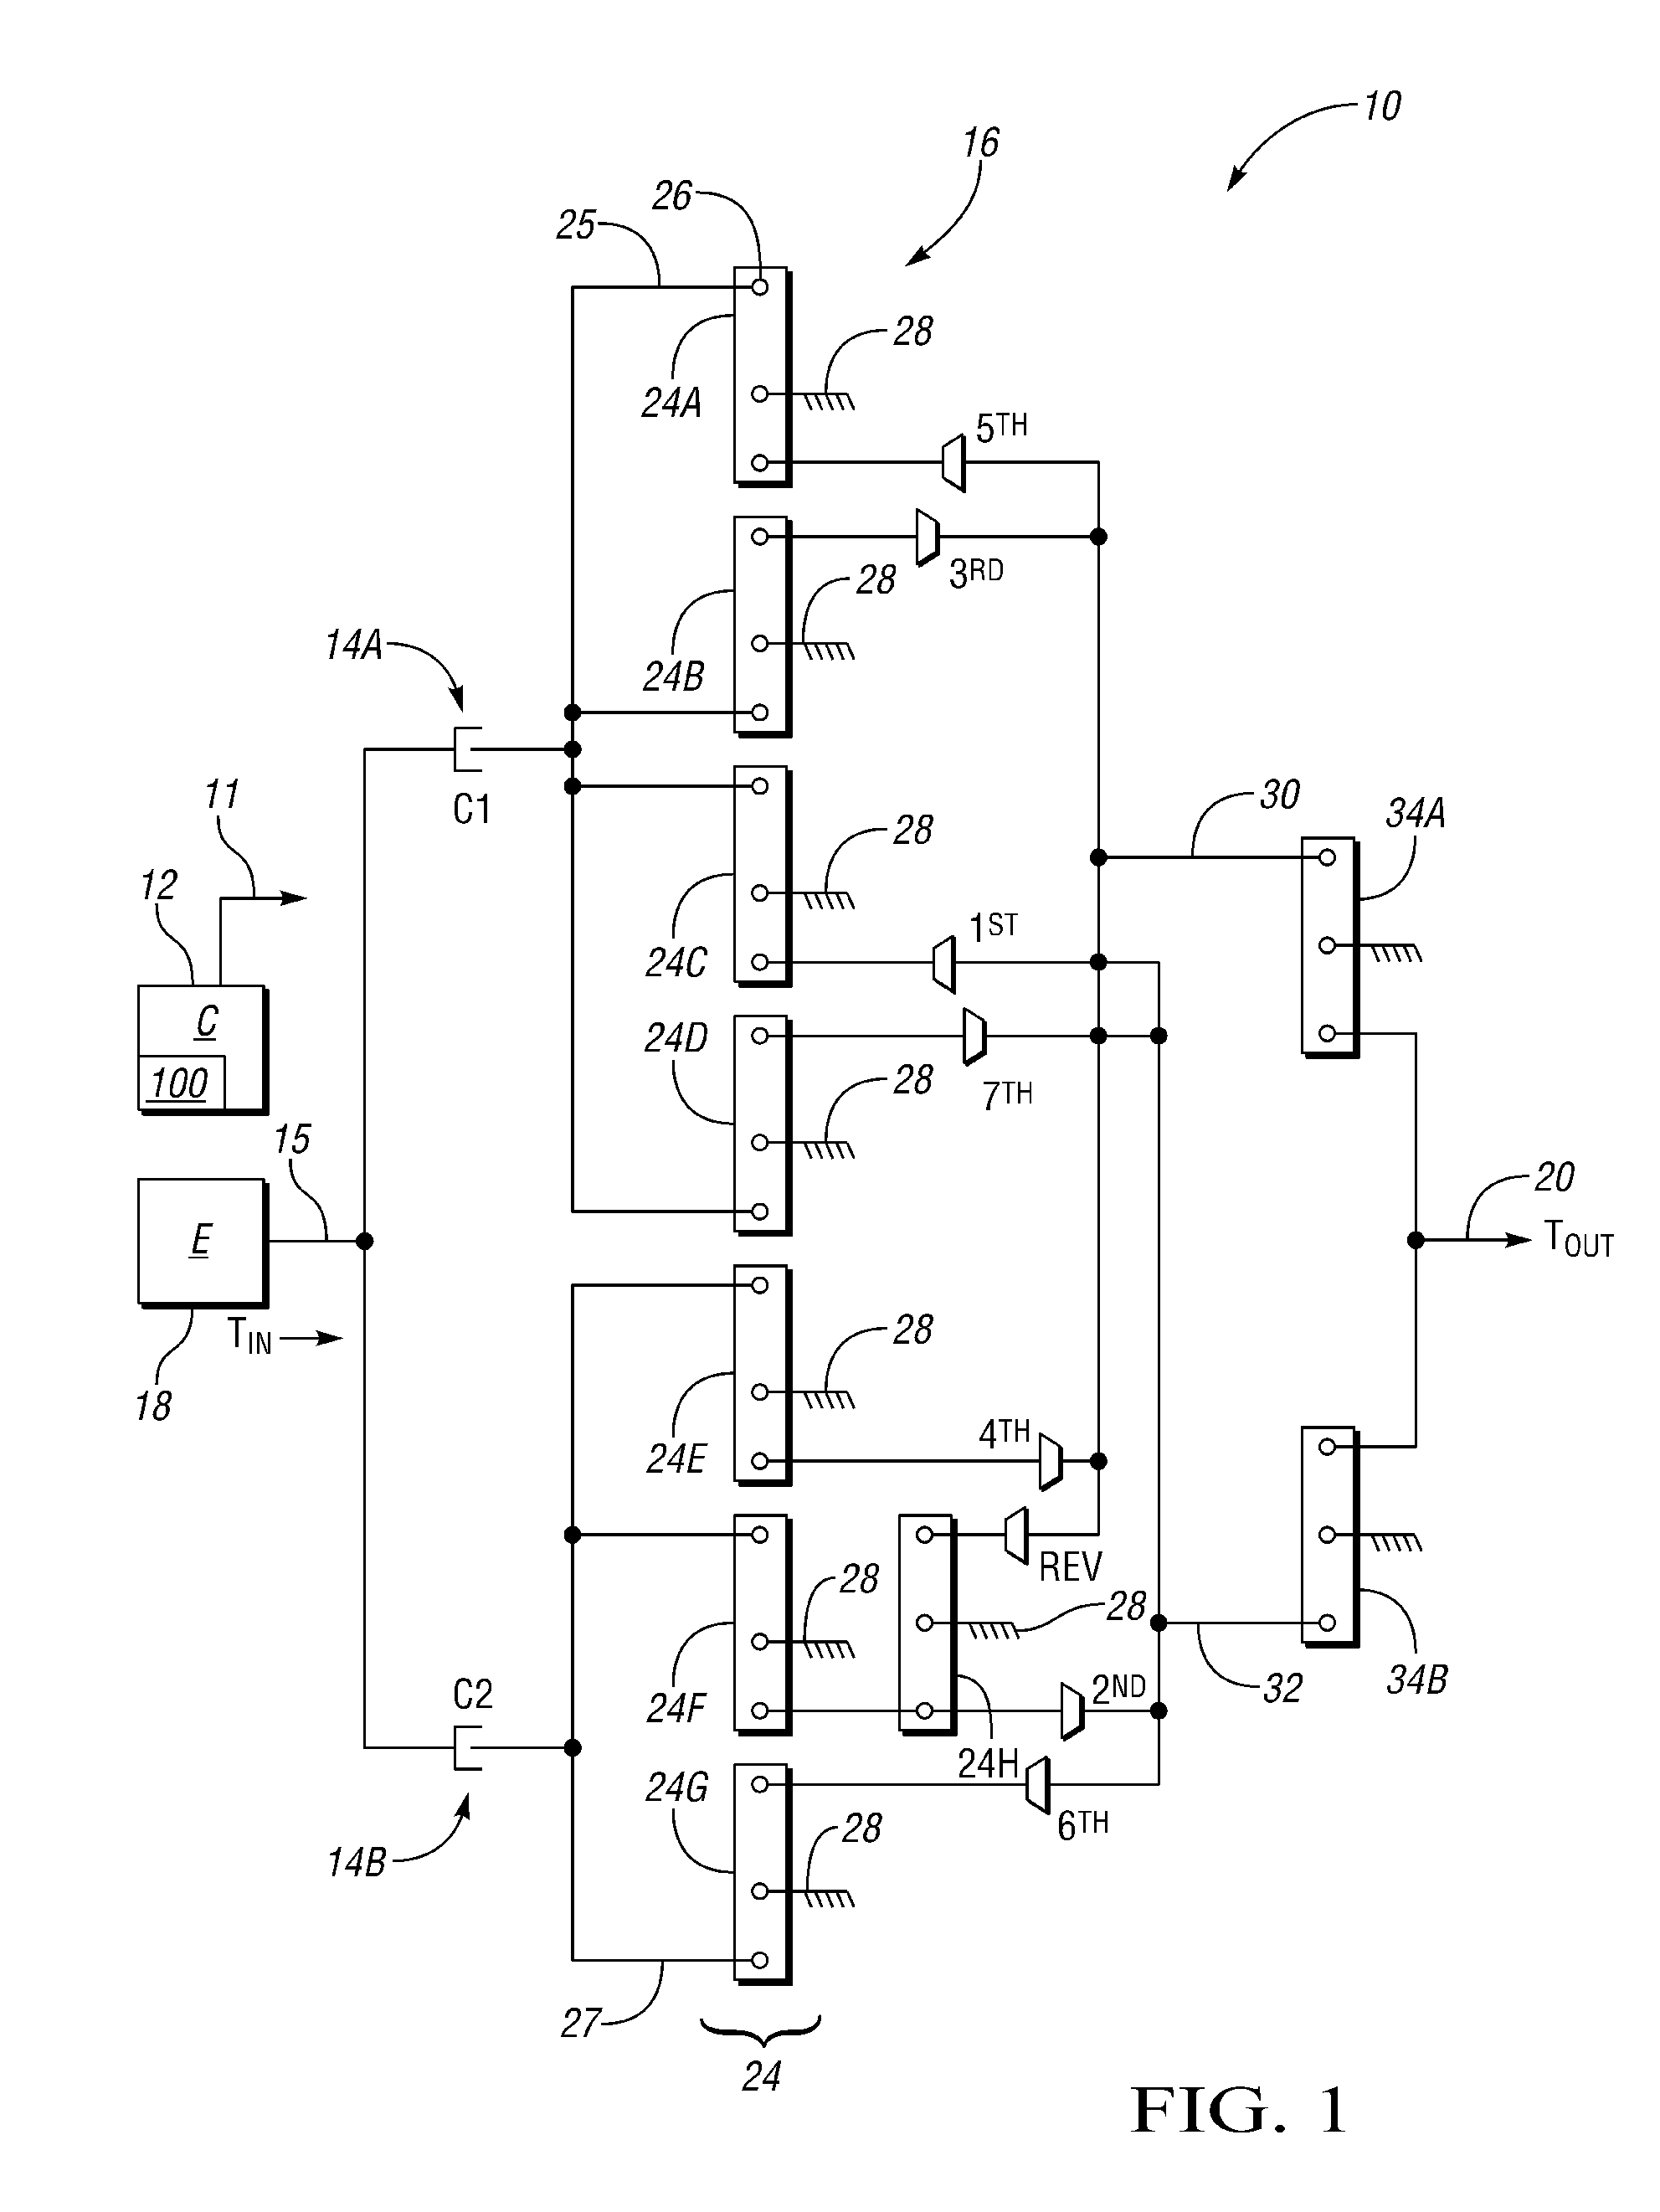 Method and apparatus for clutch control in a vehicle having an engine start-stop powertrain and a dual-clutch transmission